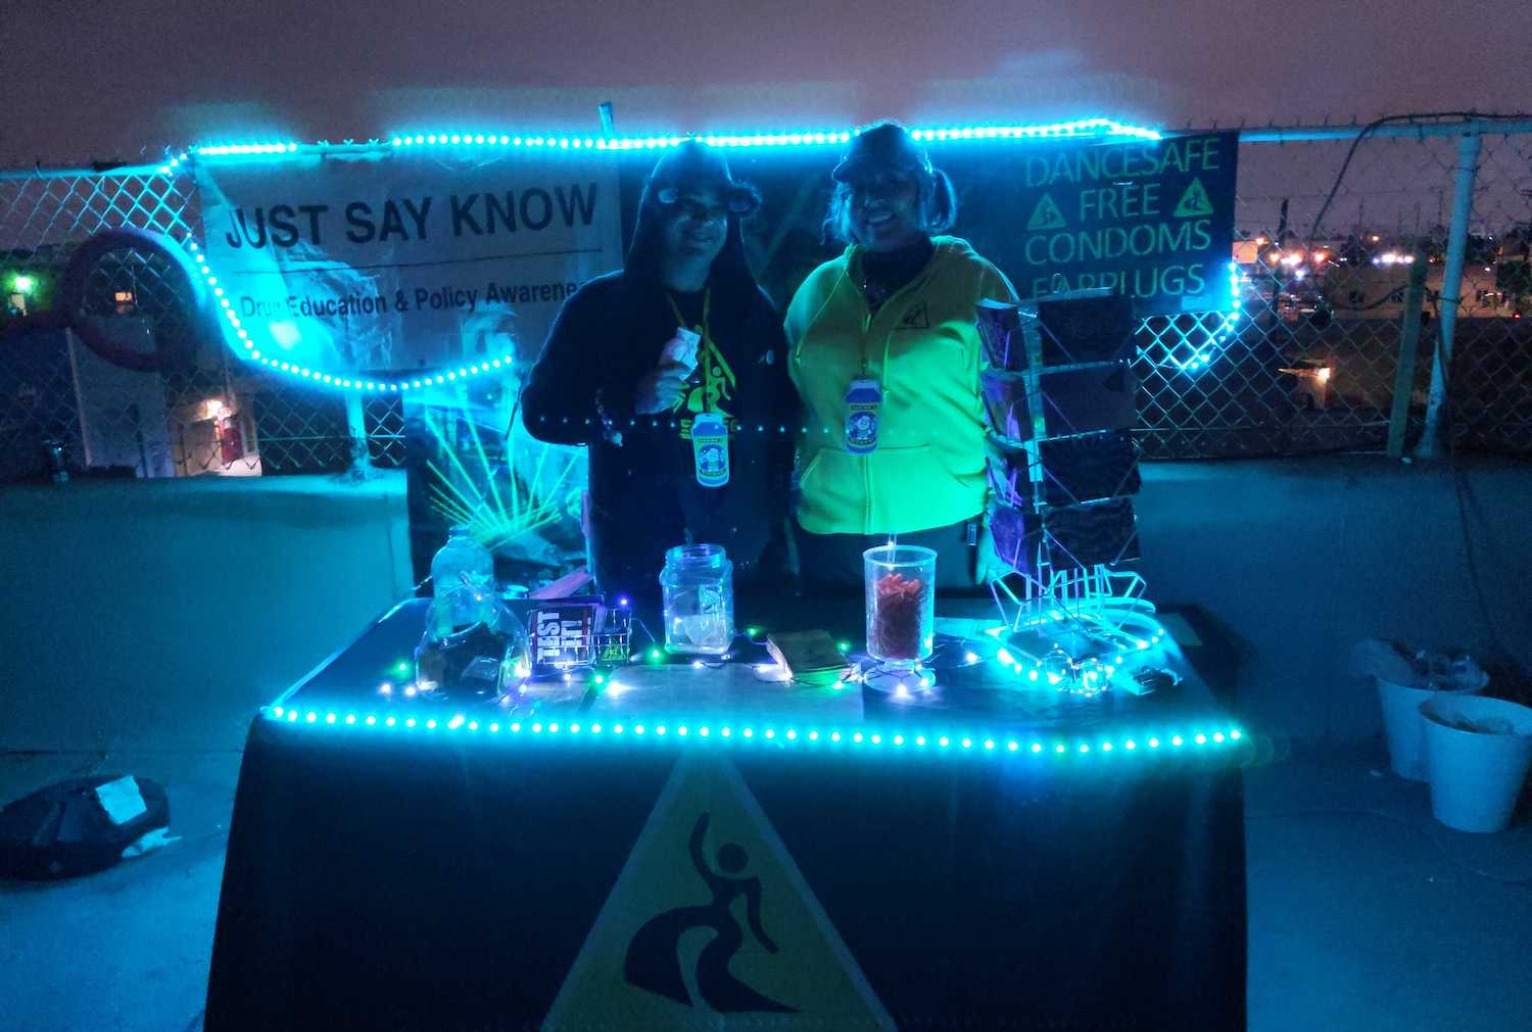 Two people, backlit with faces not very visible, stand behind a small table with a black DanceSafe-branded tablecloth on it. The table and the fence behind it are lined with glowing blue LED lights, which illuminate harm reduction supplies like earplugs and condoms scattered across the table. The people are wearing, respectively, a black sweater with the DanceSafe logo on it and fuzzy ears, and a bright yellow shirt with the DanceSafe logo on it and a hat. Behind them are posters saying things like "just say know" and "free condoms" hung up on a chain link fence. They appear to be on the top of a building, with a concrete floor and a concrete segment behind them below the fence.